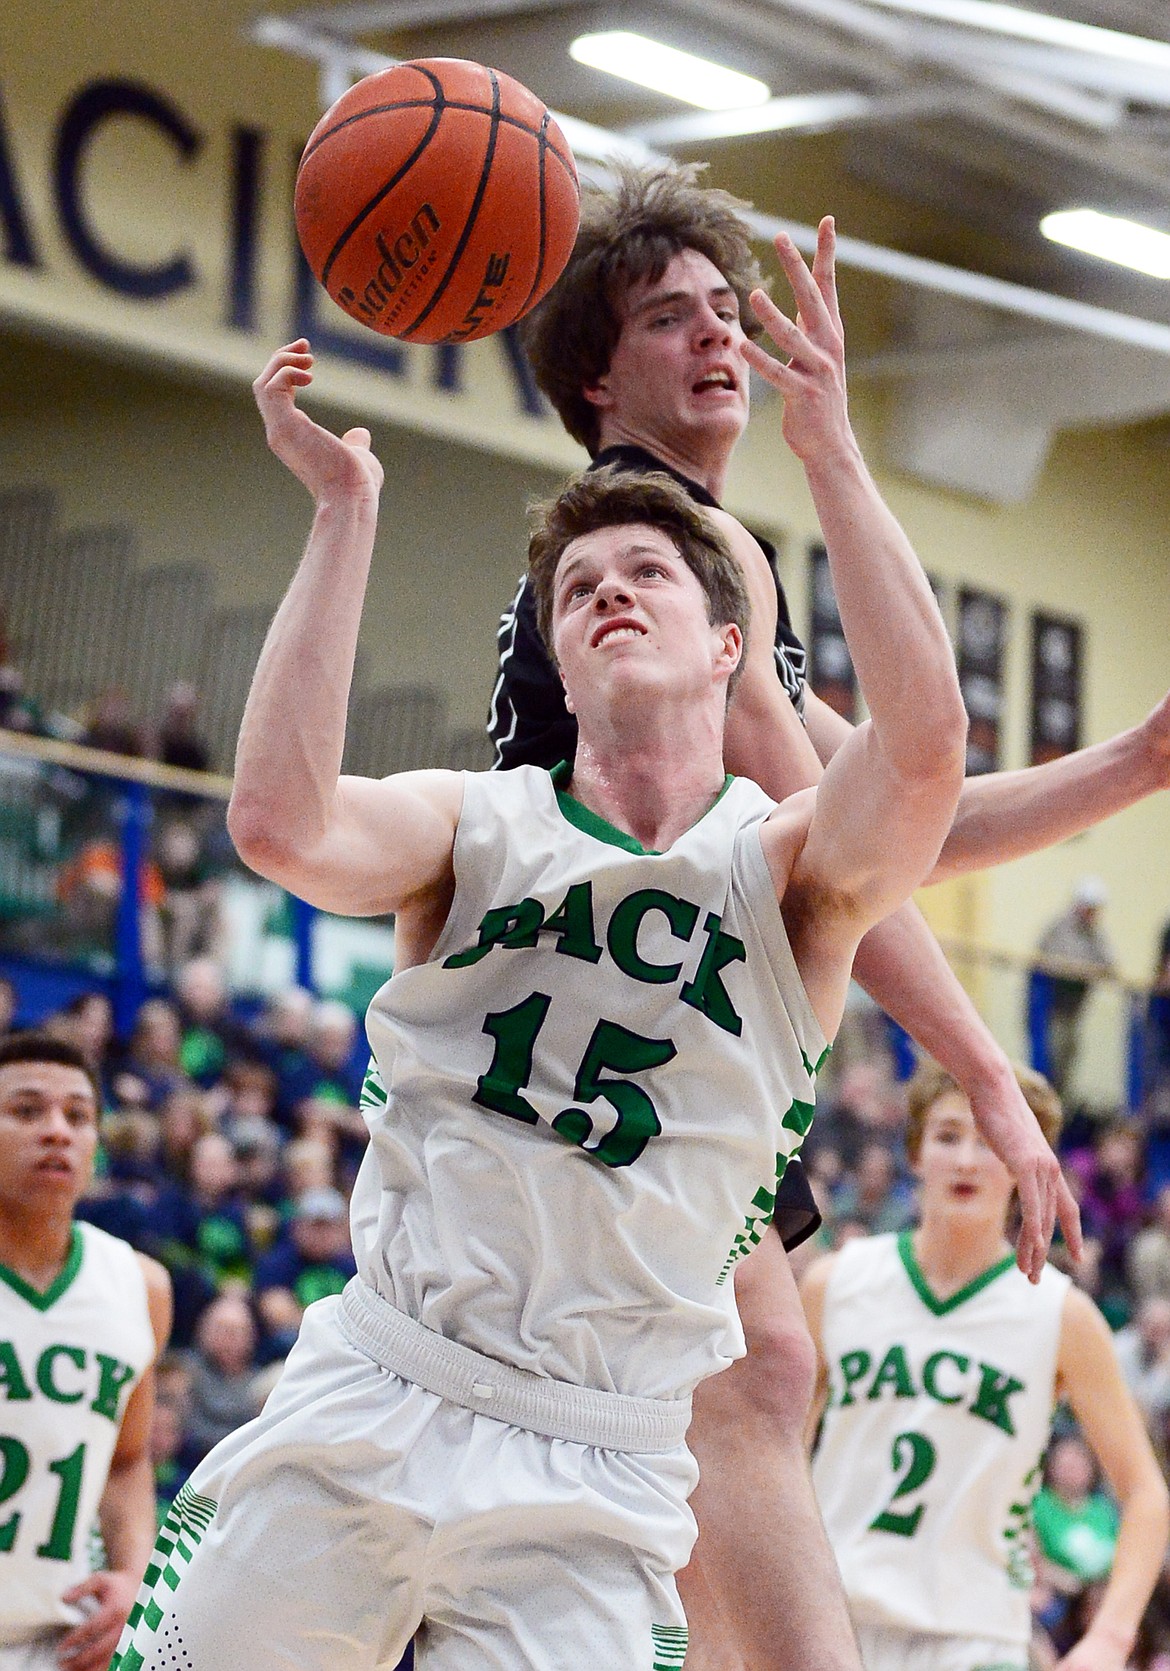 Glacier's Drew Engellant (15) grabs a rebound over Flathead's Cooper Smith (20) during a crosstown matchup at Glacier High School on Friday. (Casey Kreider/Daily Inter Lake)